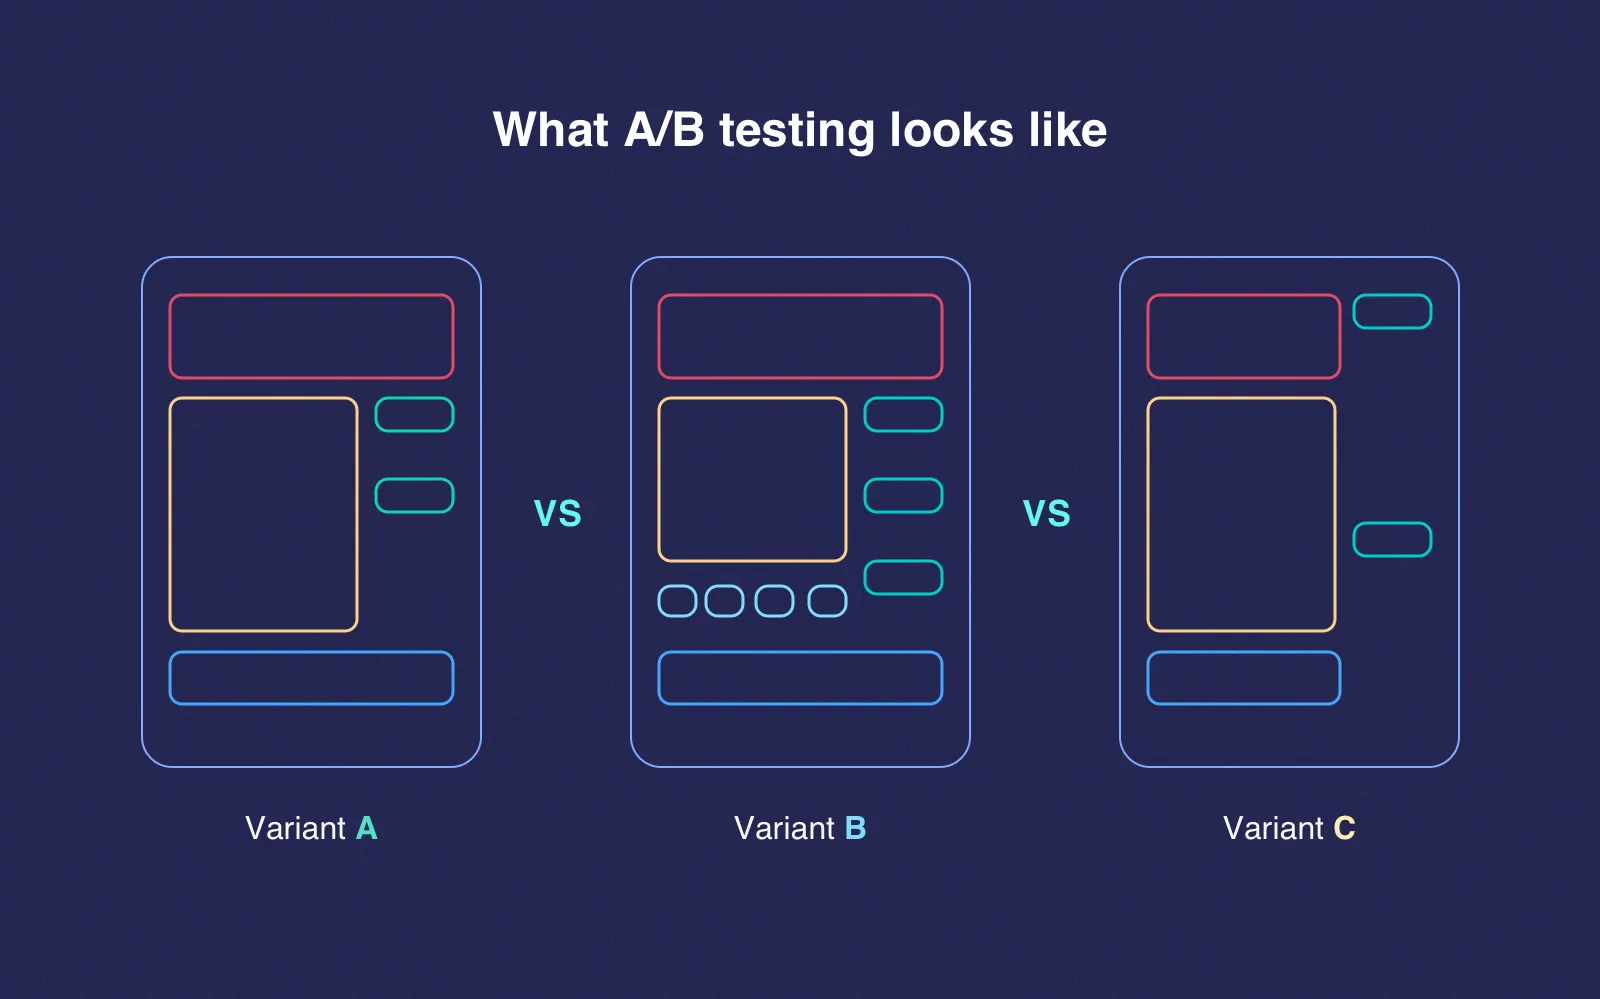 A/B testing is a great personalization tool that you can use